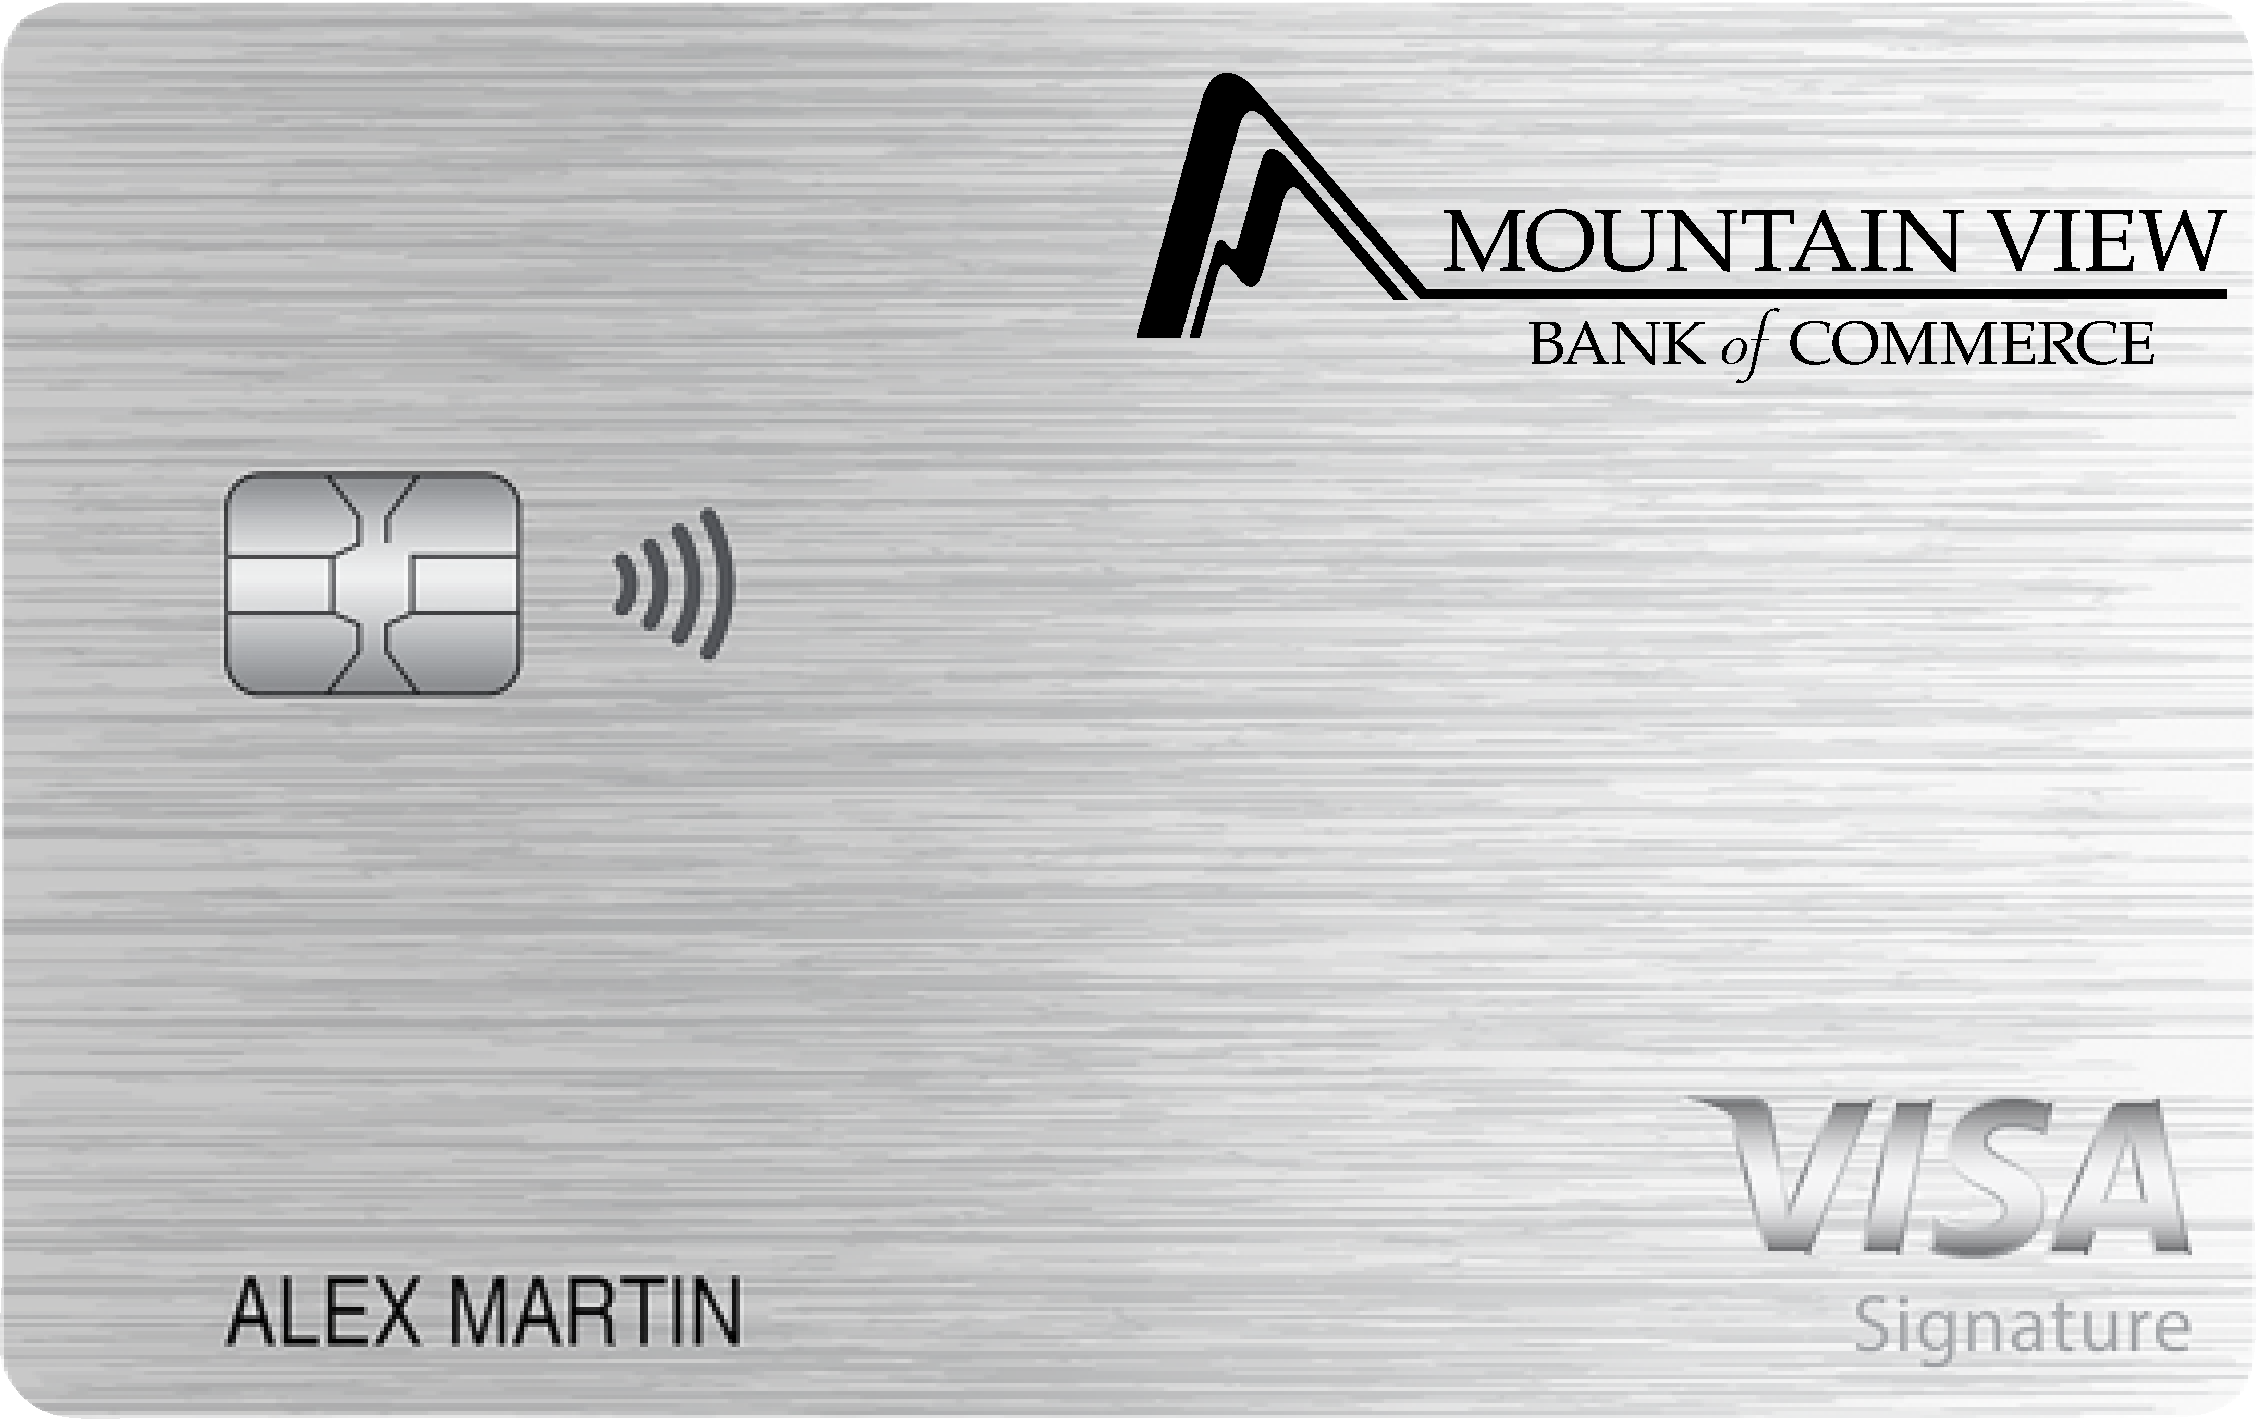 Mountain View Bank of Commerce Travel Rewards+ Card